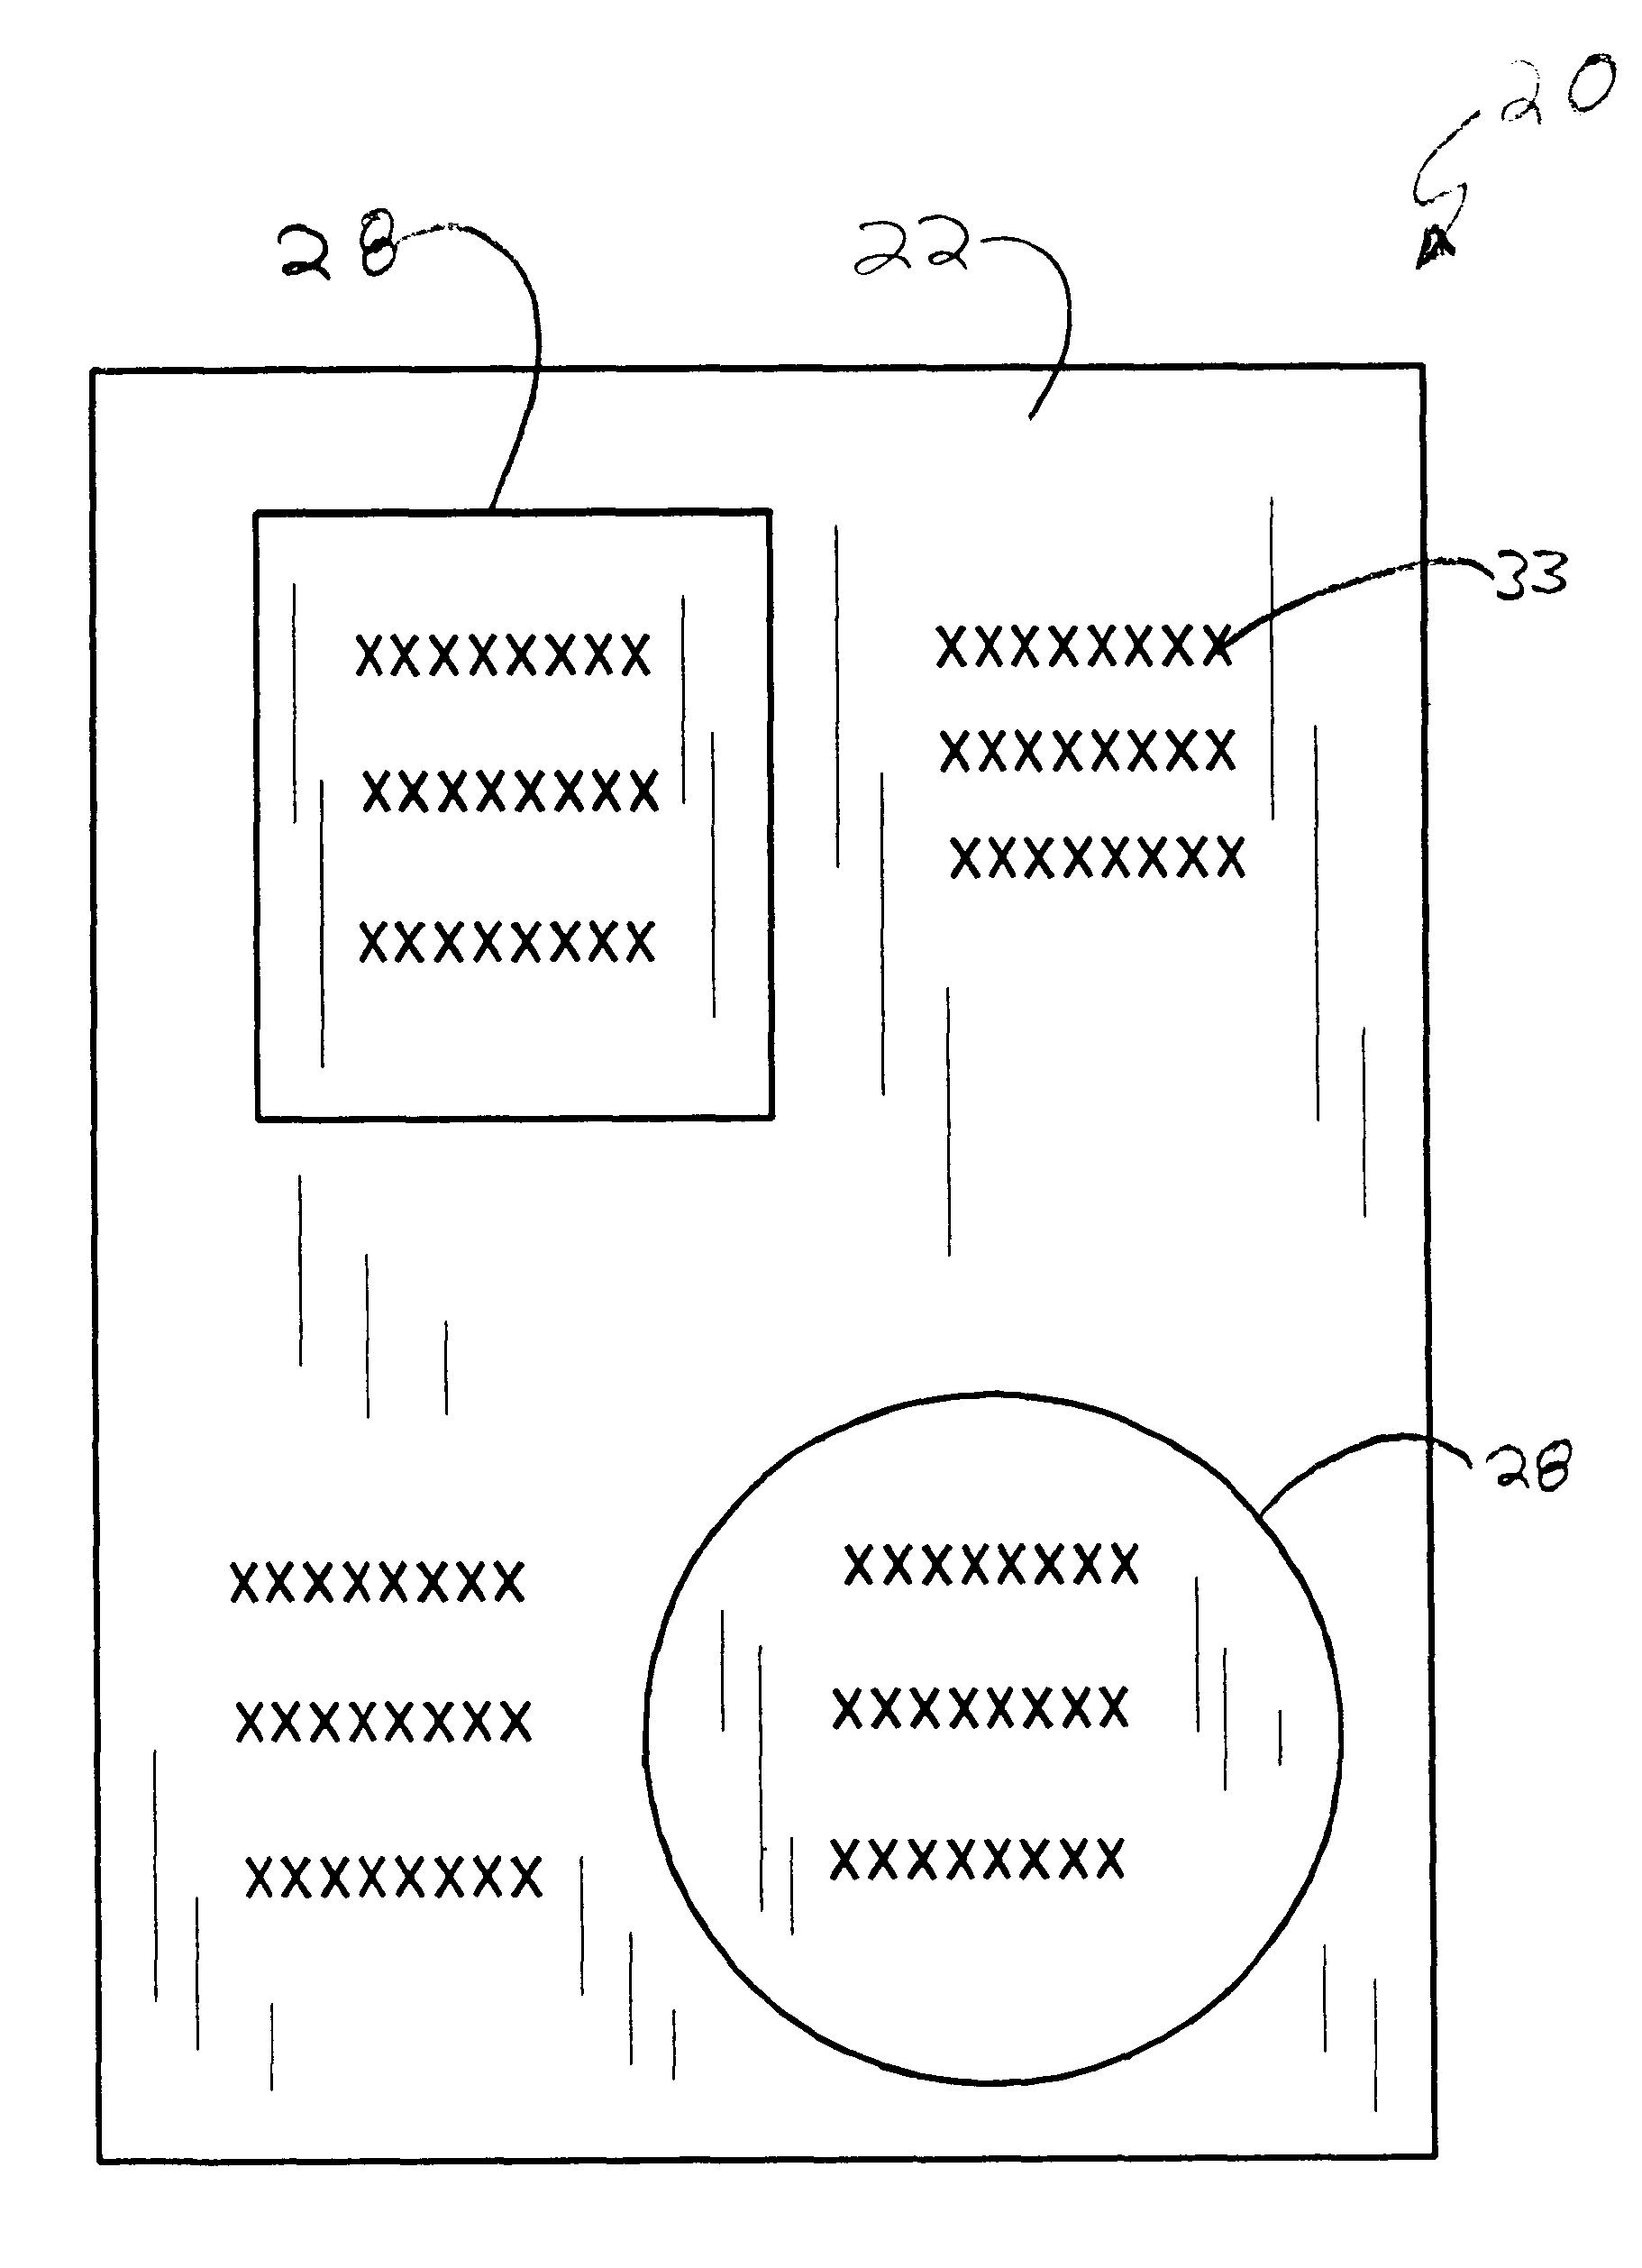 Laminate with integrated compact disk label and methods